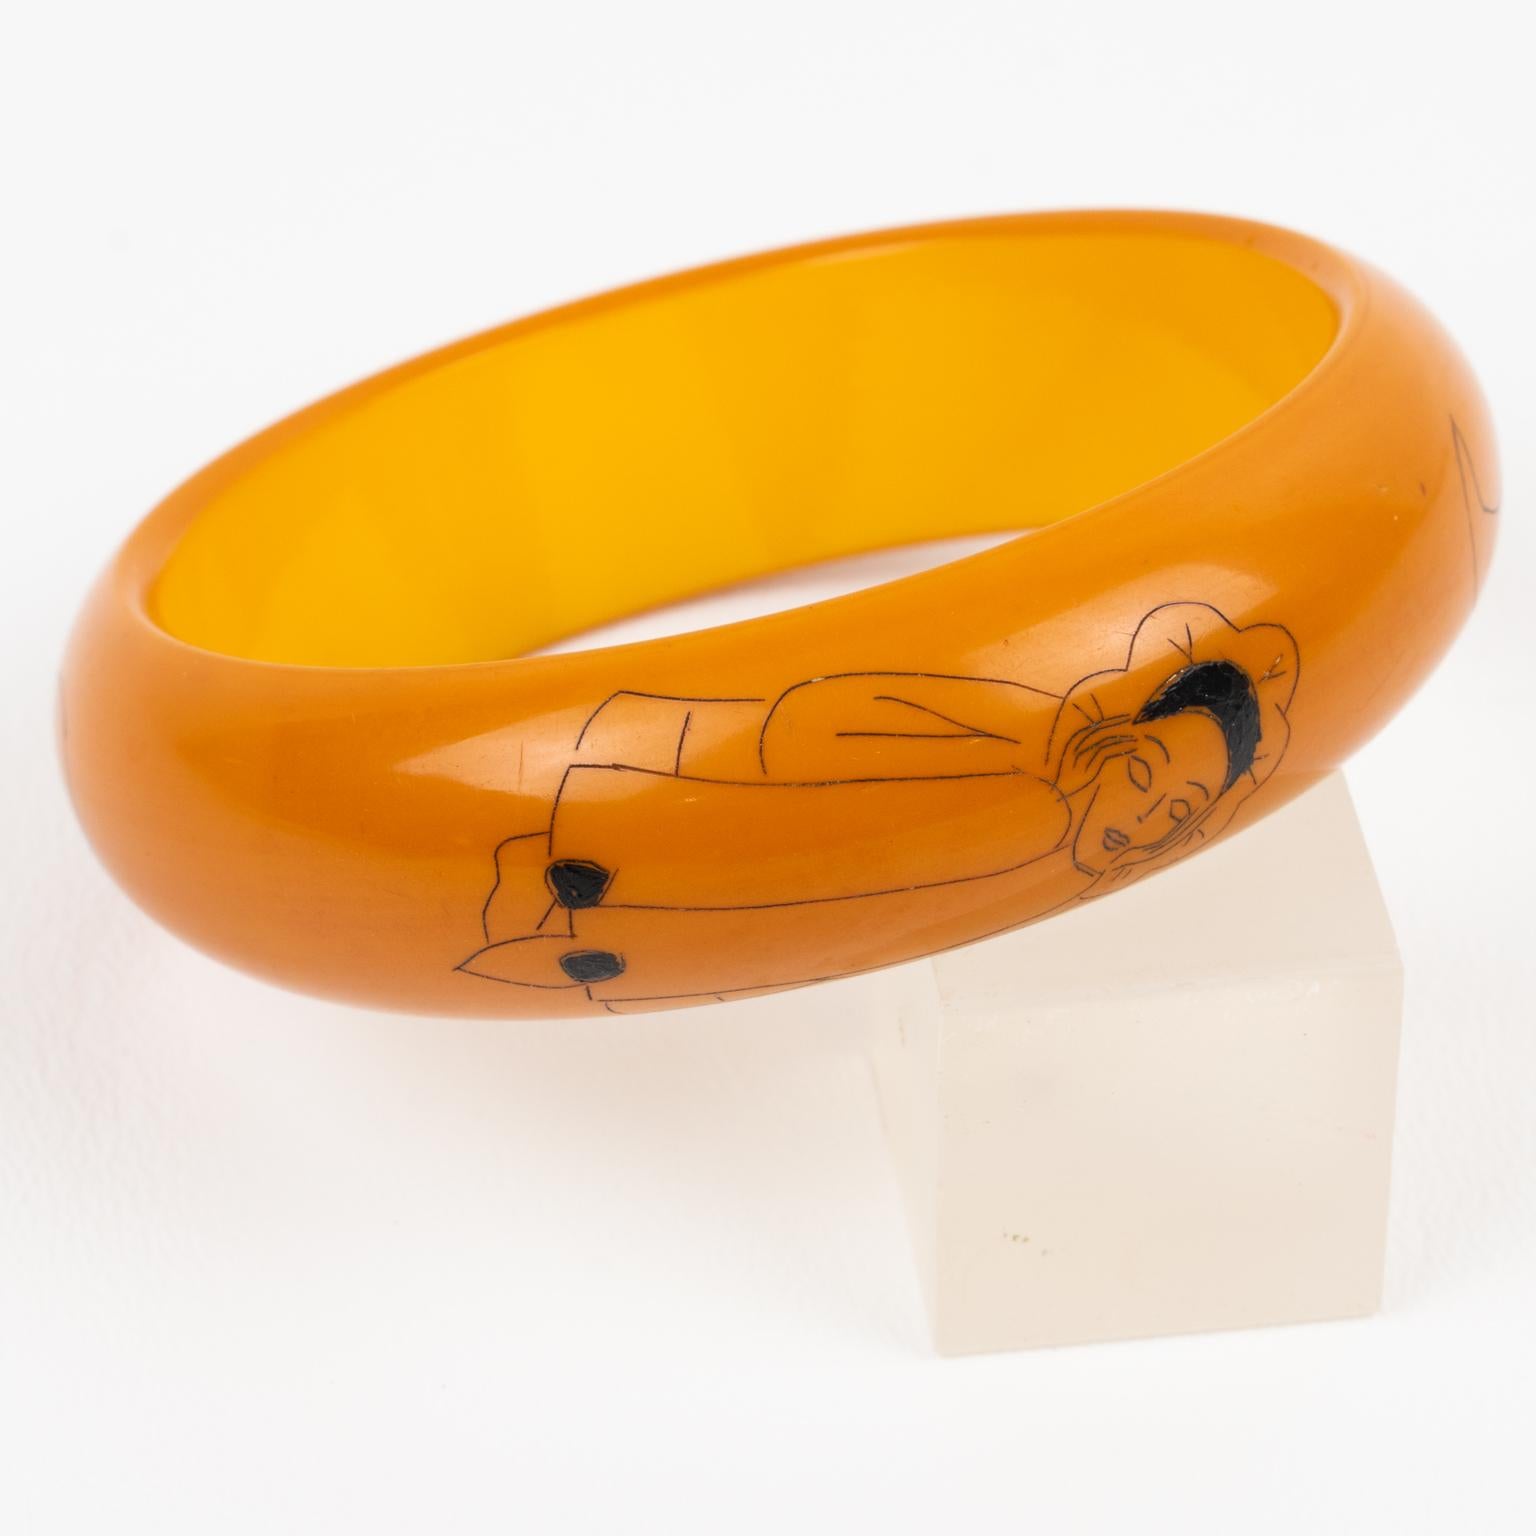 Lovely and rare Bakelite bracelet bangle with pierrot - clown design. Chunky domed shape with warm butterscotch color and black contrasting designs. The bracelet is ornate with 2 pierrot designs, one standing and one sitting and in between those two